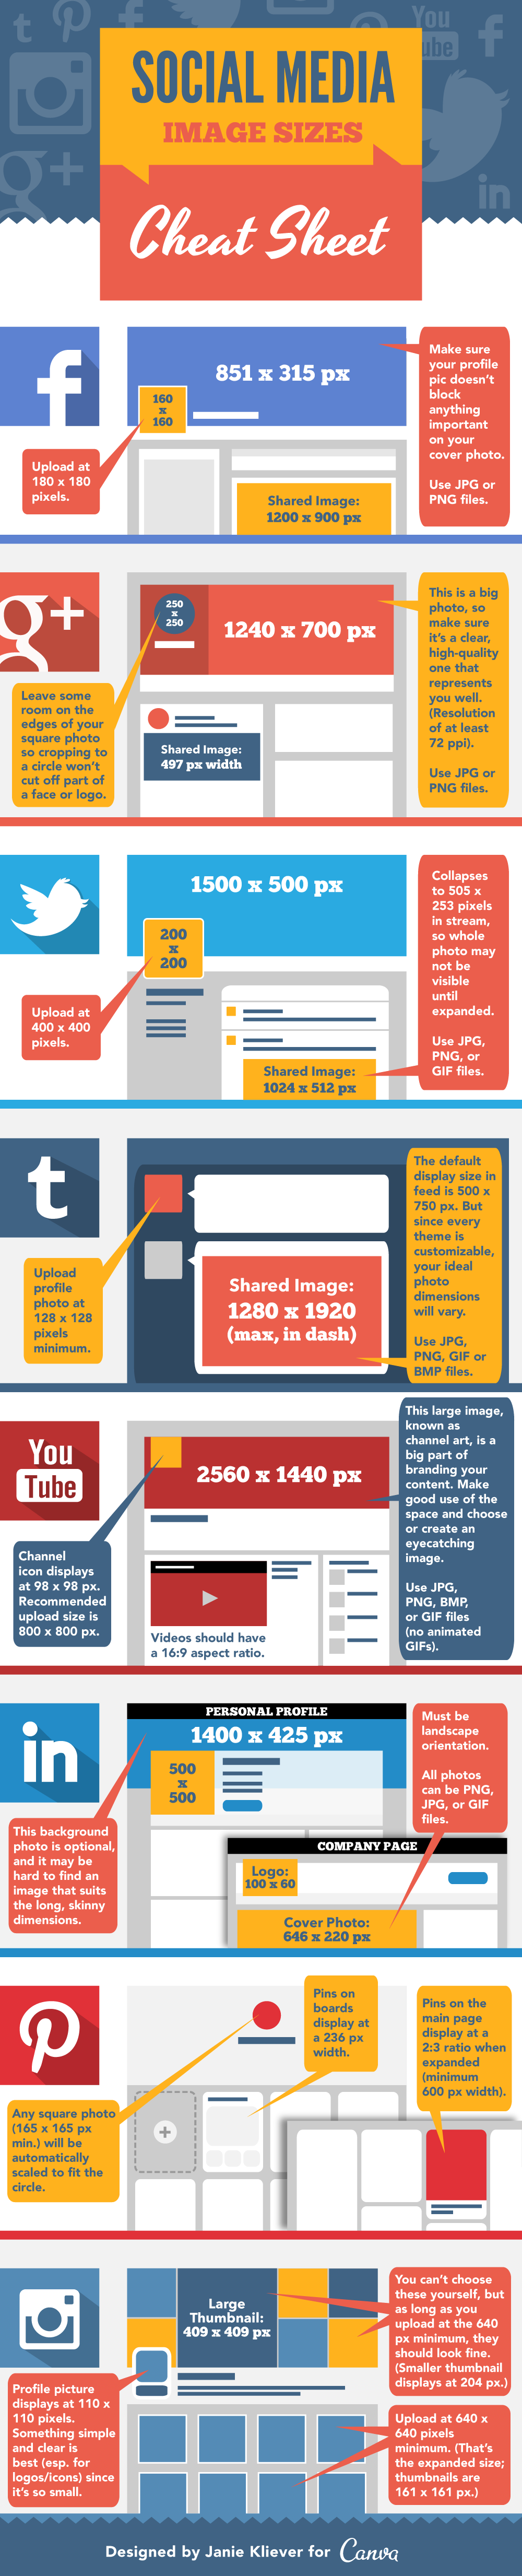 social-media-images-infographic